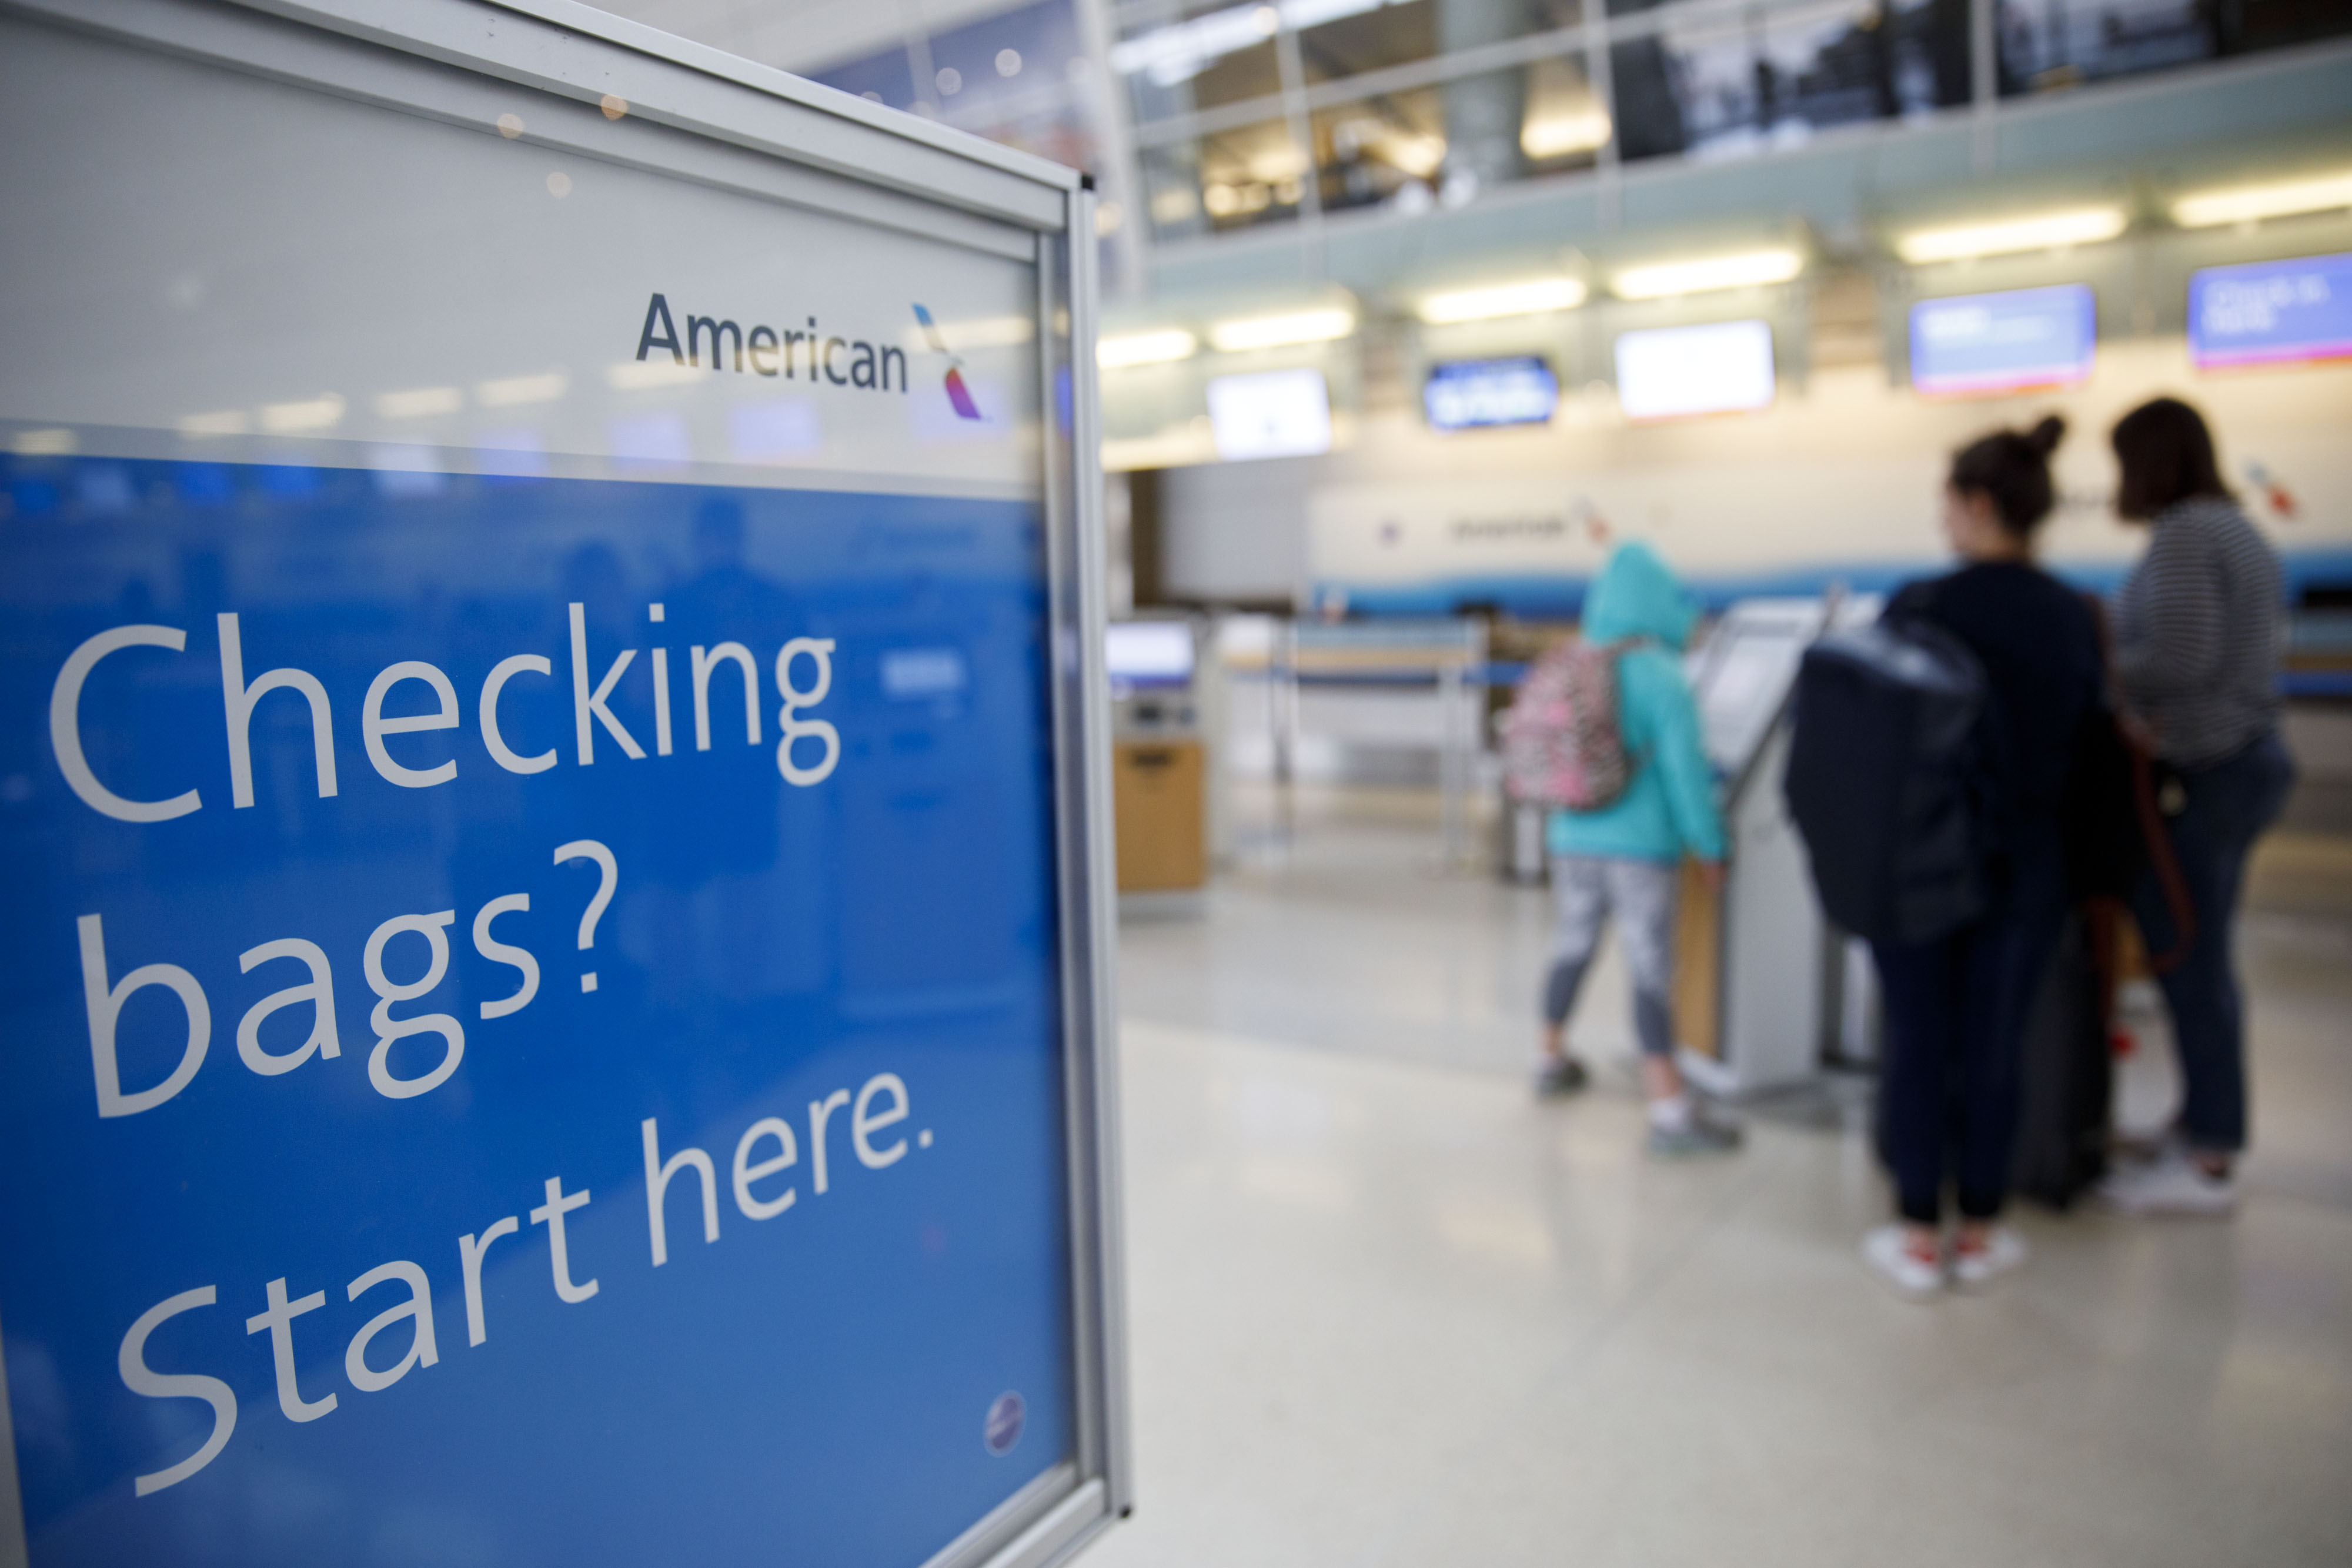 A sign for American Airlines reads: “Checking Bags? Start here.” In the background, people line up at an airport check in.